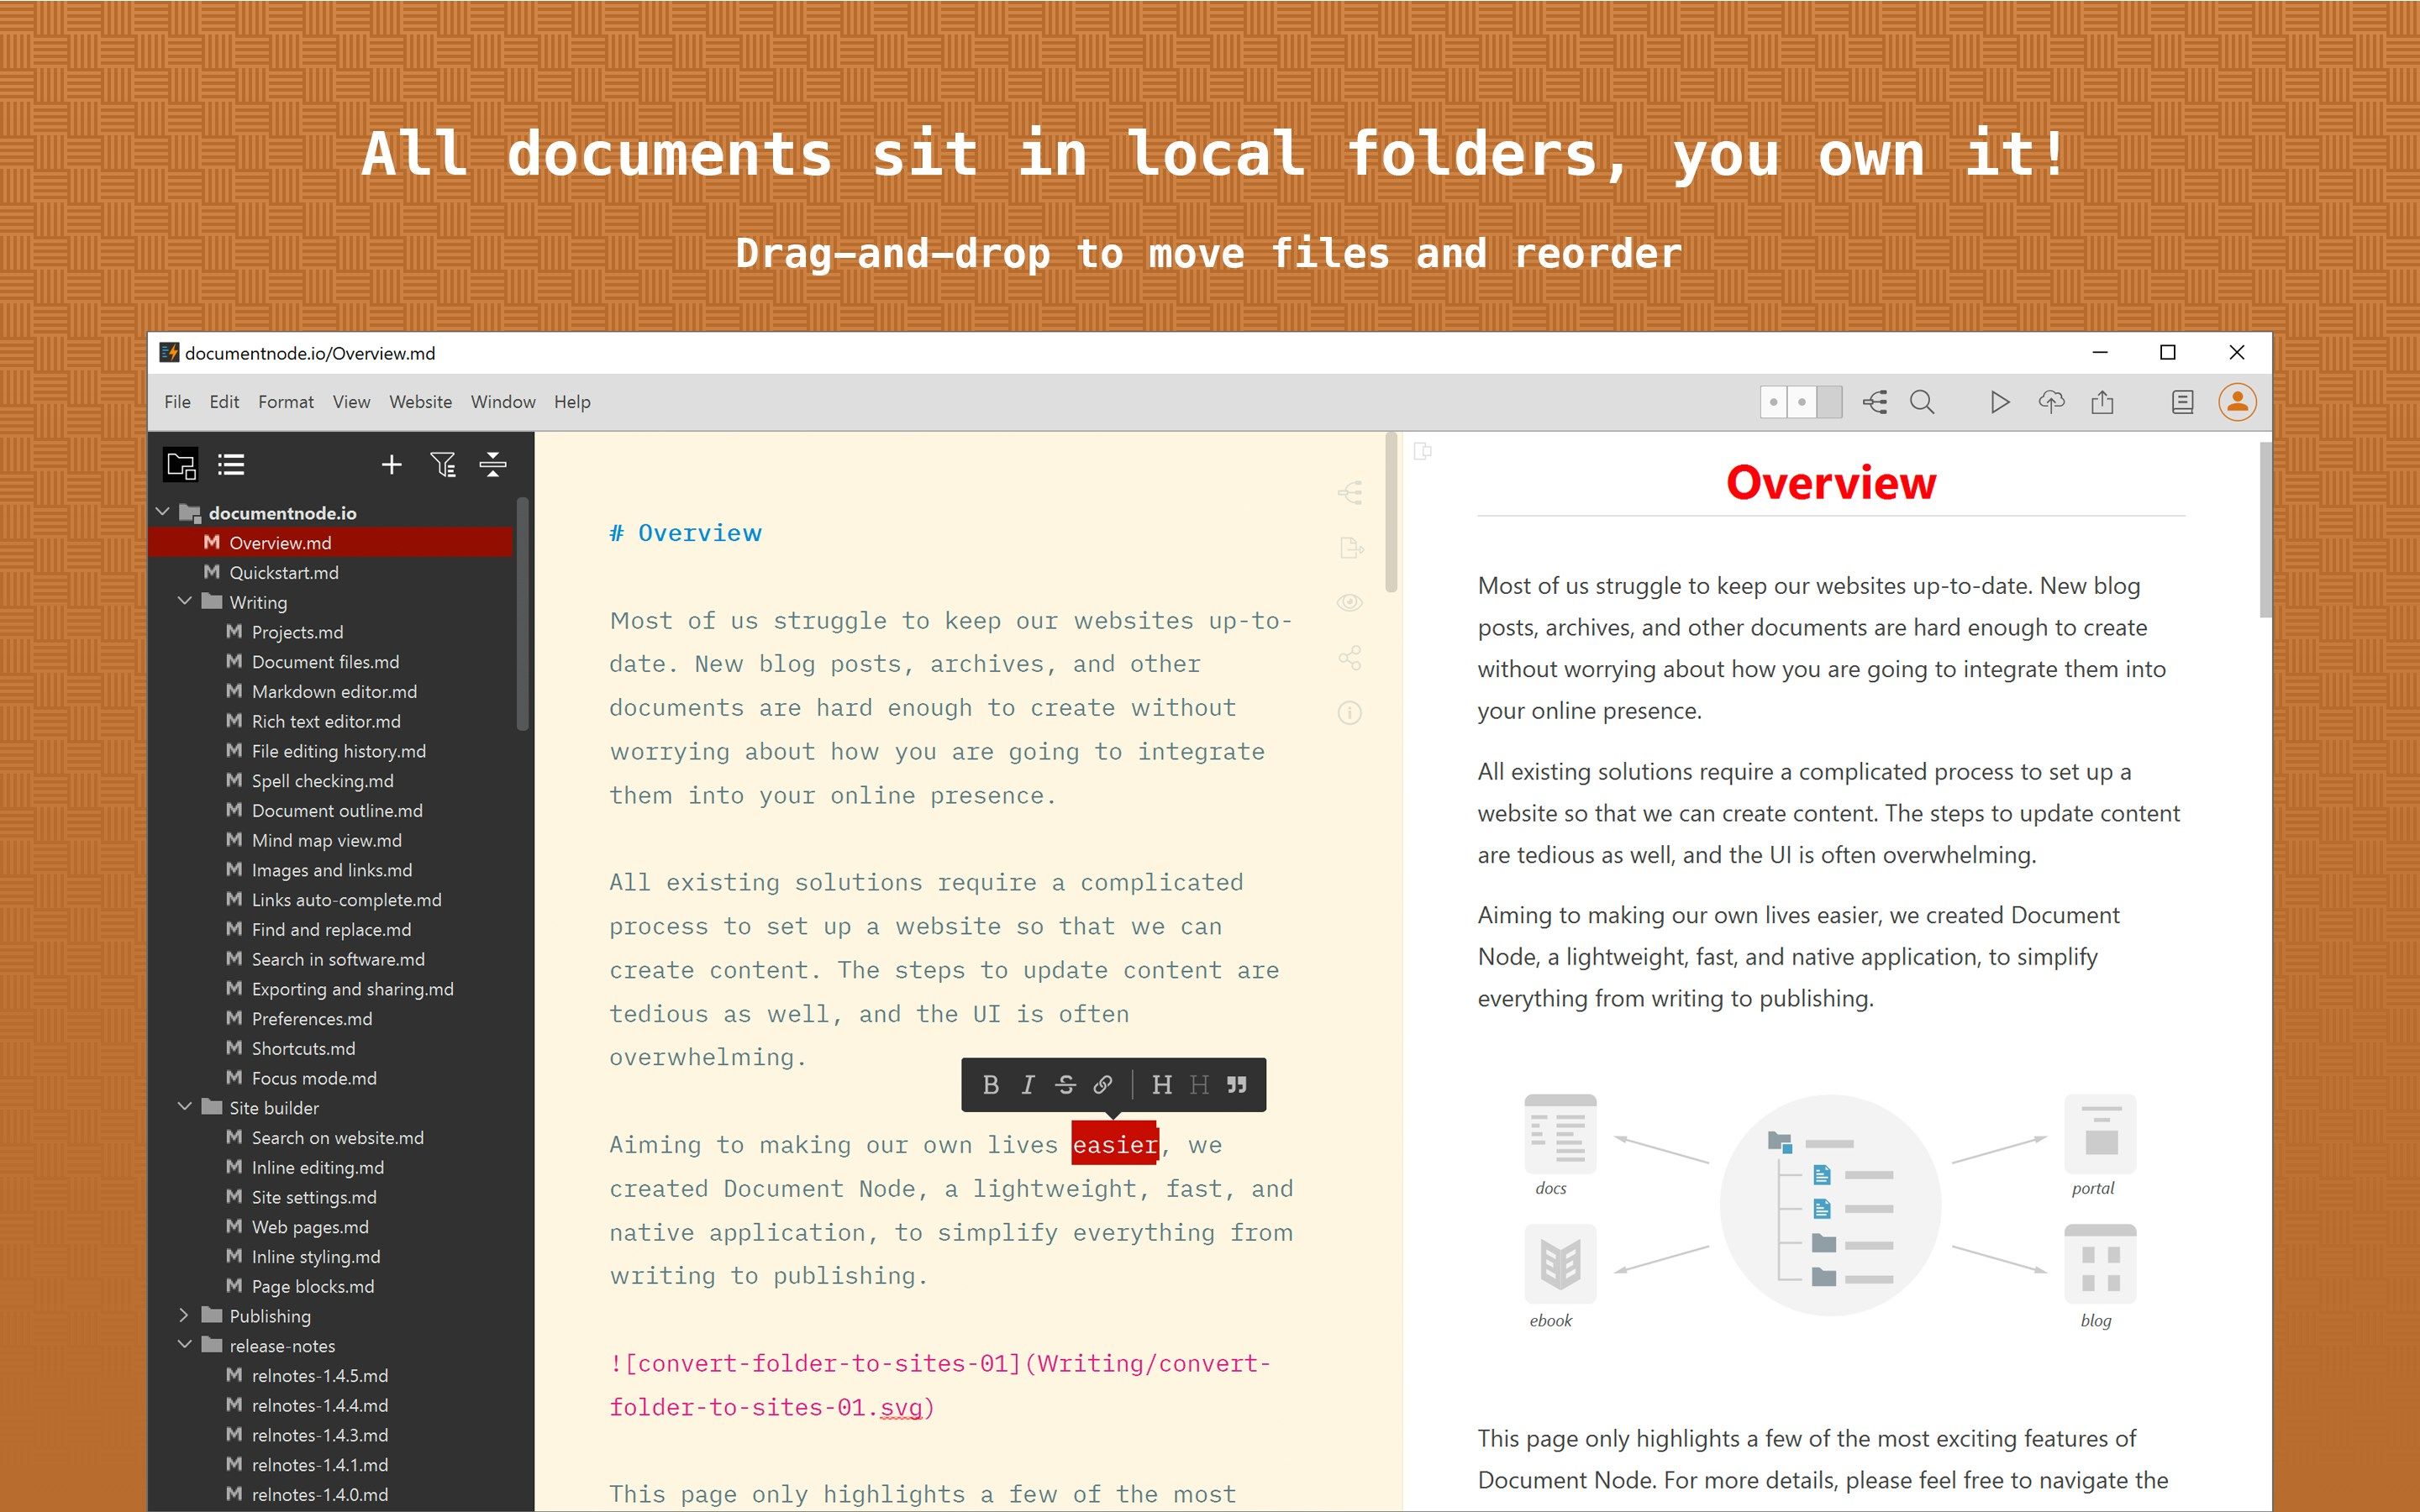 All documents sit in local folders, you own it! Drag-and-drop to move files and reorder